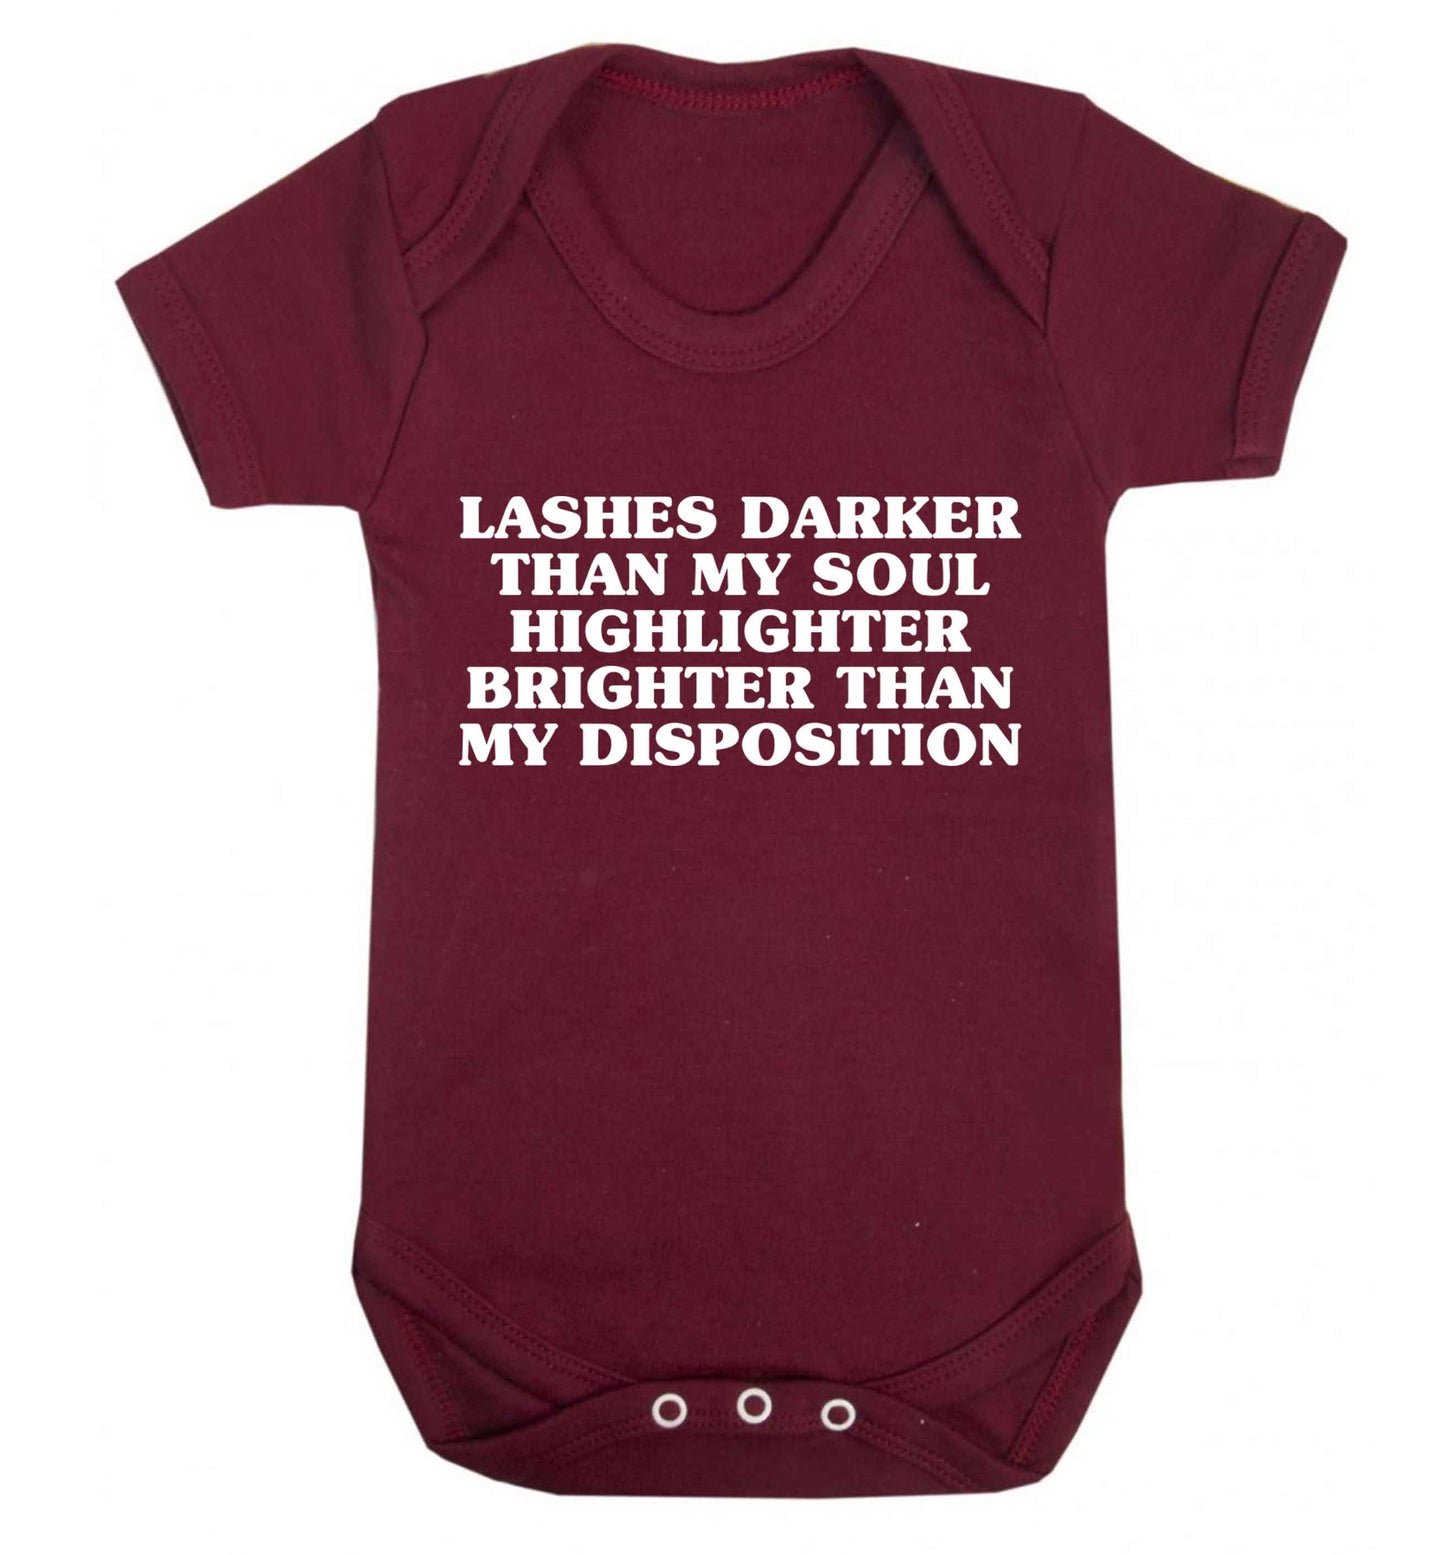 Lashes darker than my soul, highlighter brighter than my disposition Baby Vest maroon 18-24 months